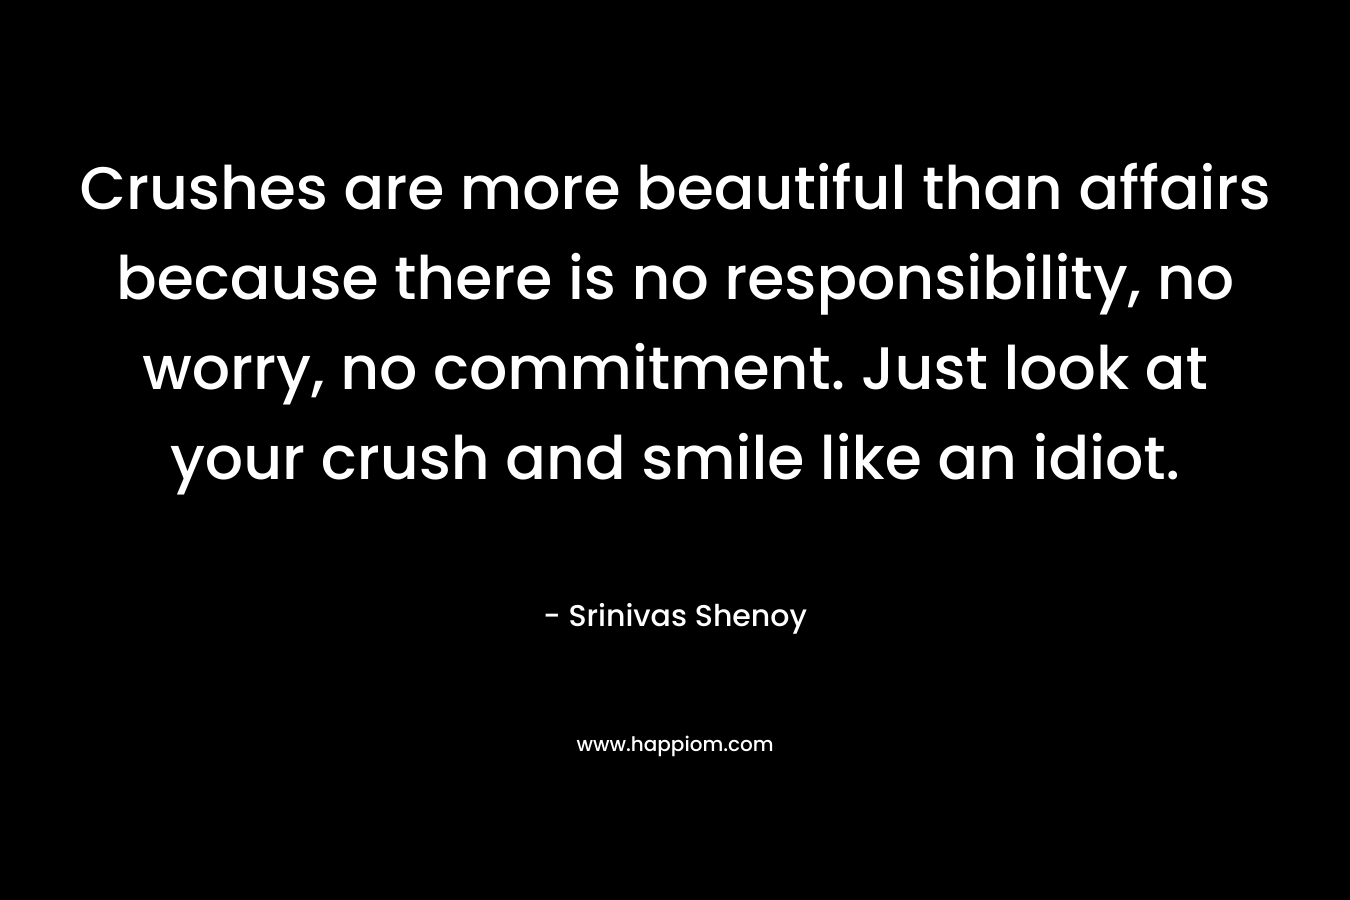 Crushes are more beautiful than affairs because there is no responsibility, no worry, no commitment. Just look at your crush and smile like an idiot. – Srinivas Shenoy